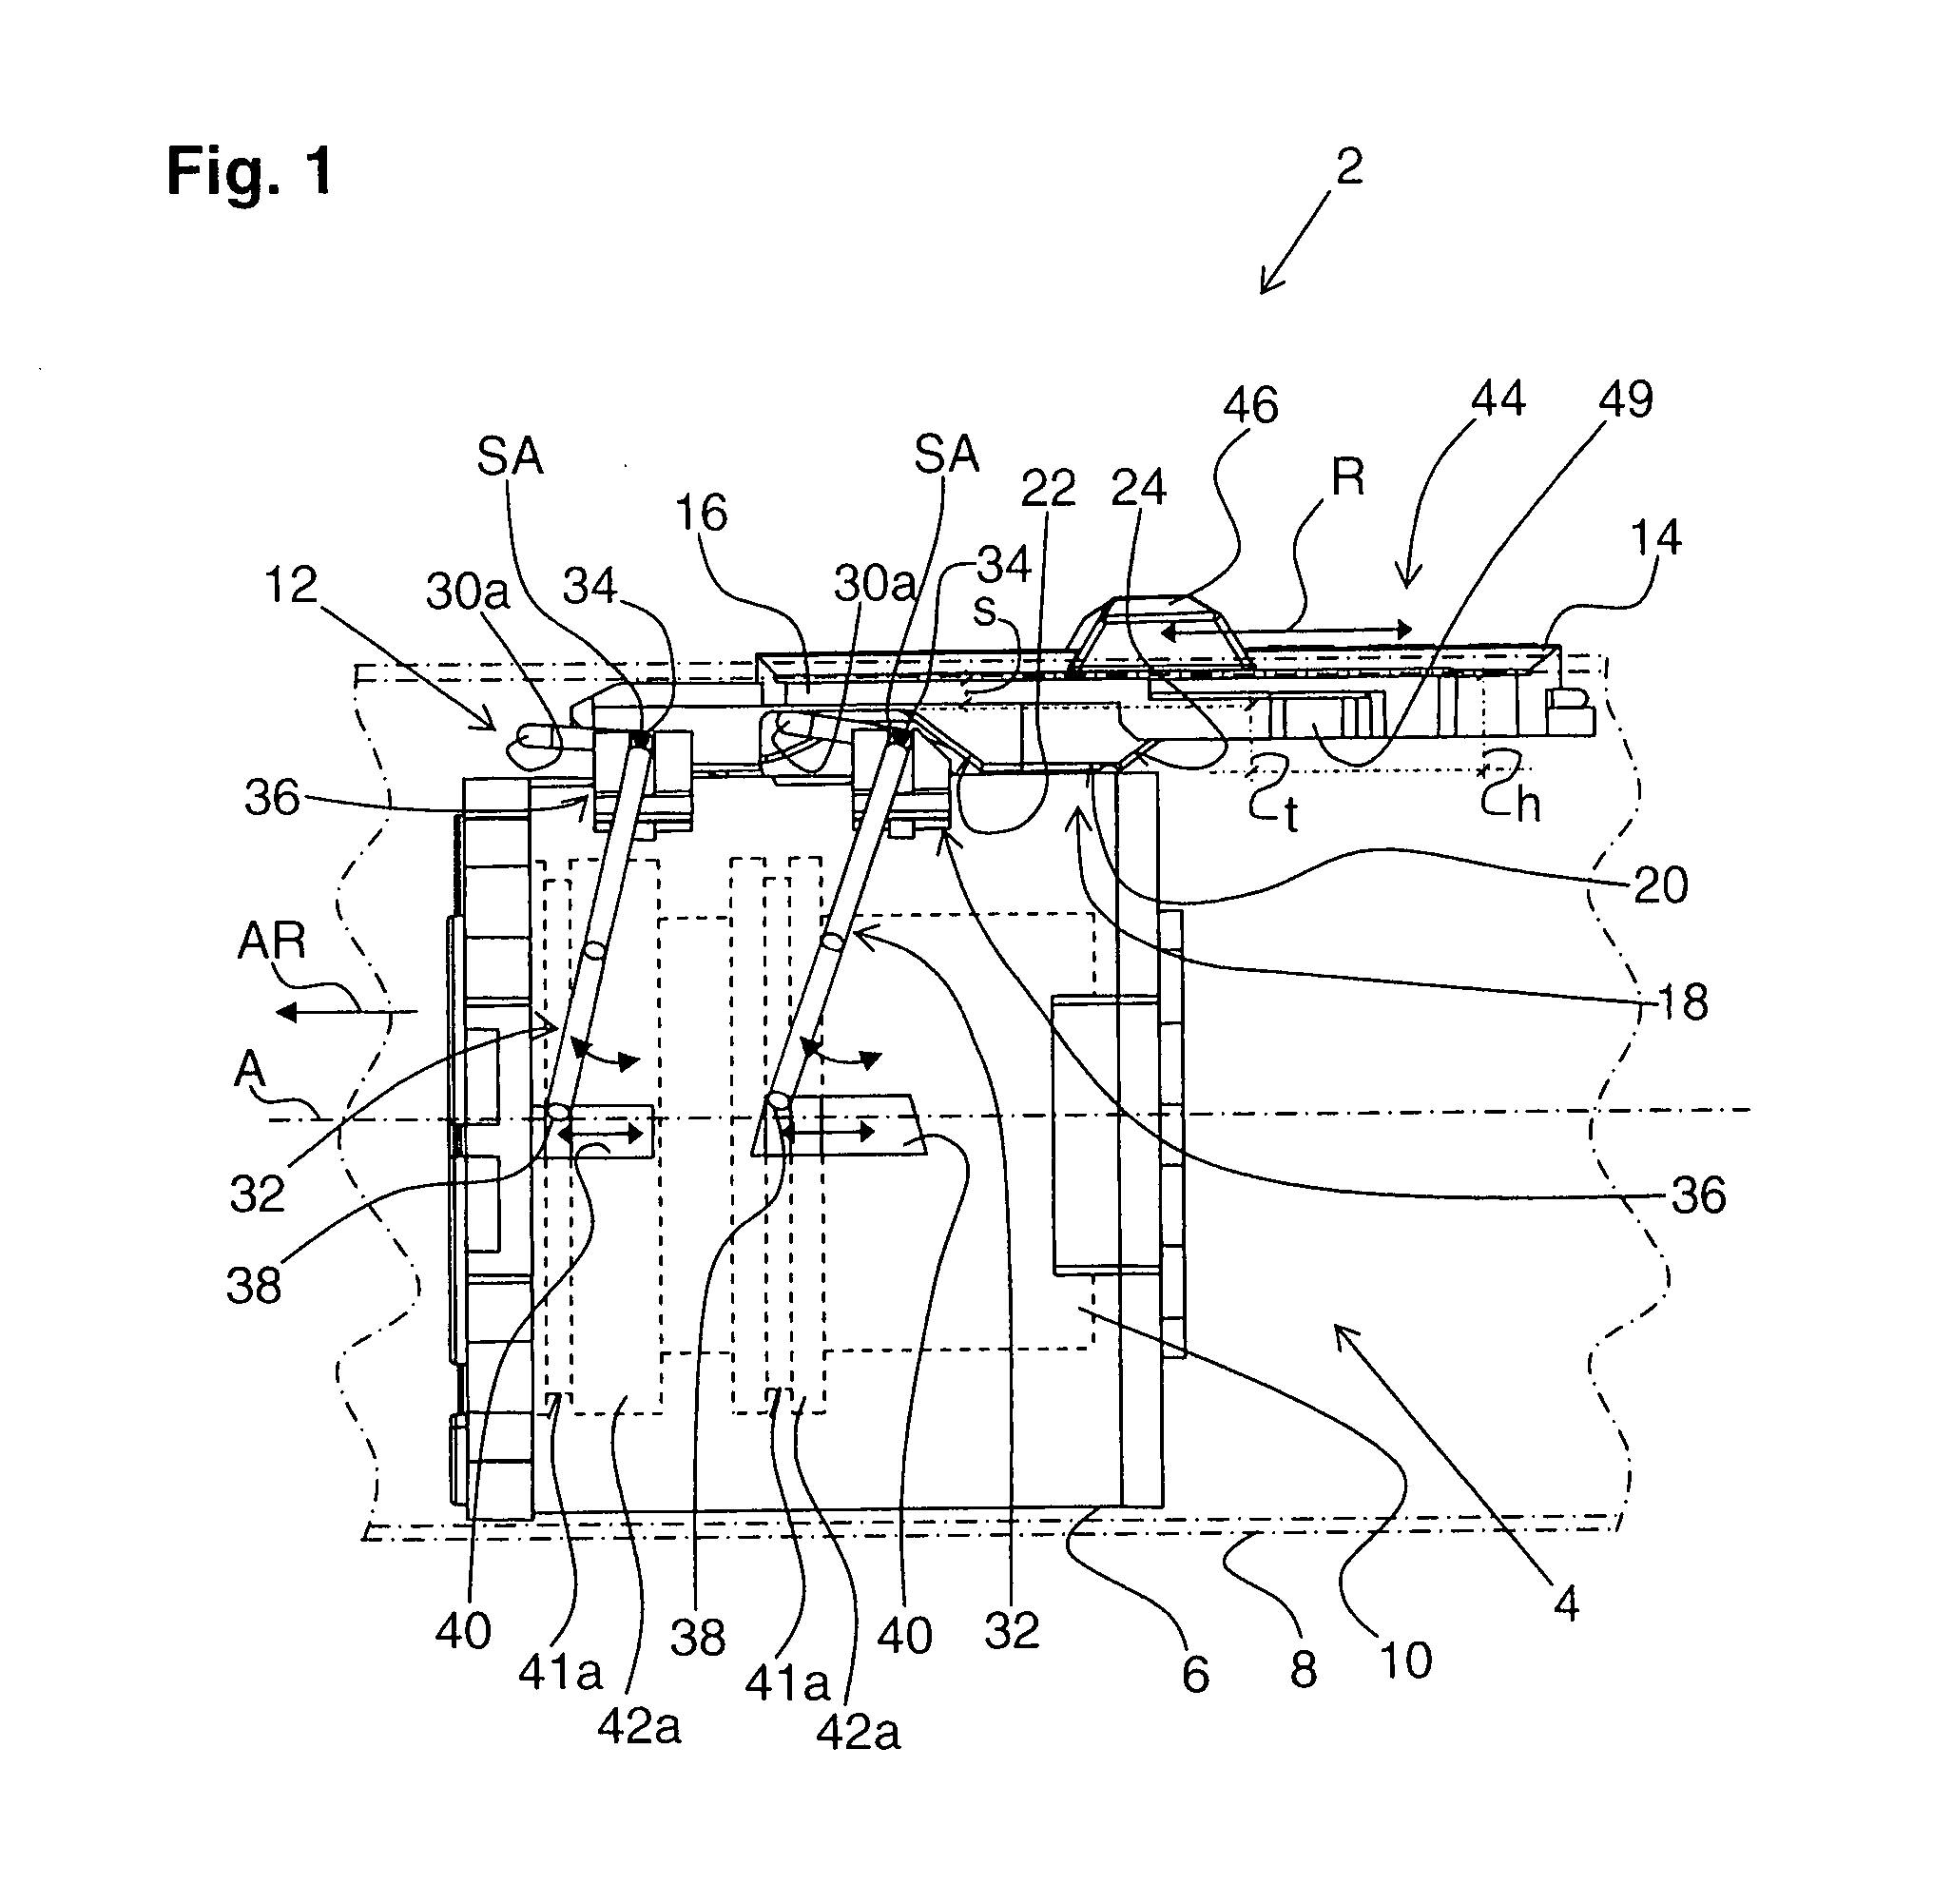 Electrical tool with a multi-stage gear transmission